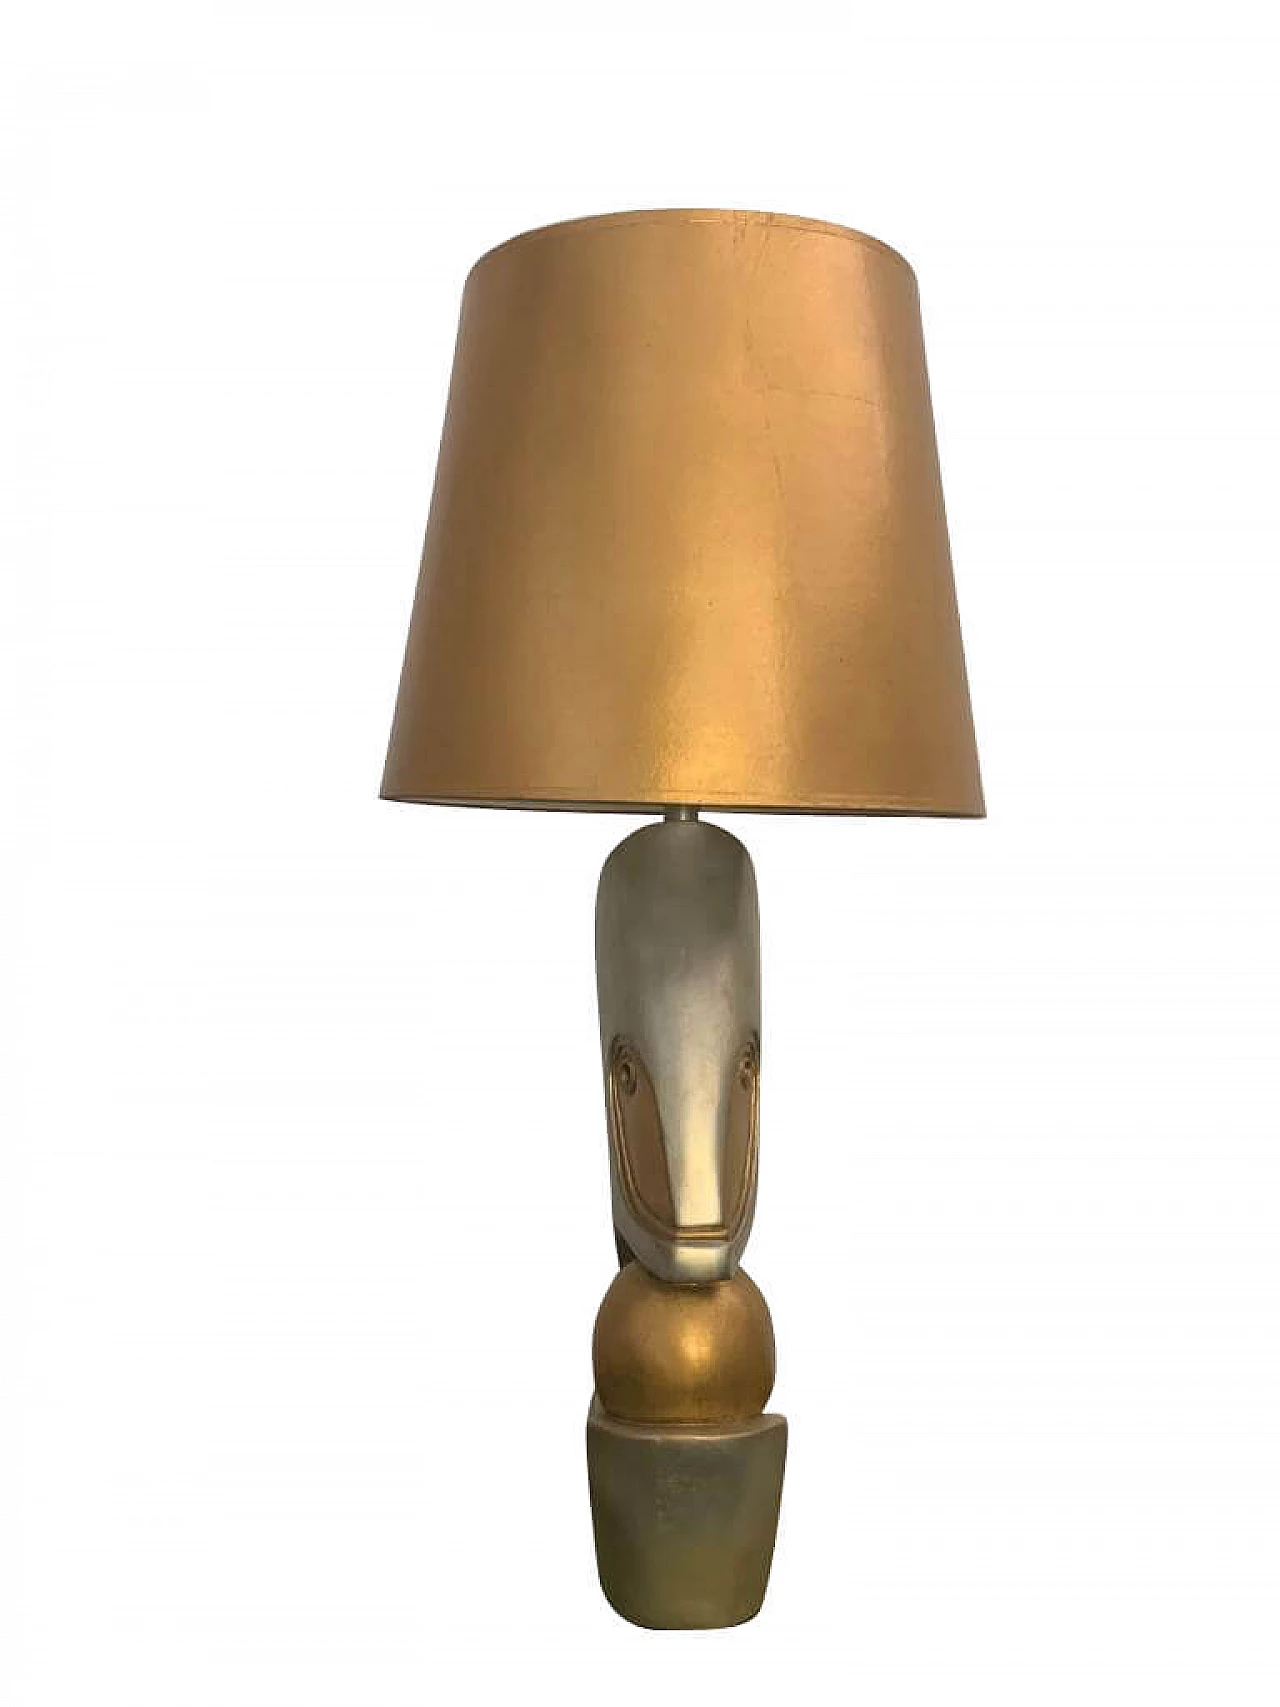 George table lamp by Leeazane for Lam Lee Group Dallas, 1990s 1198060